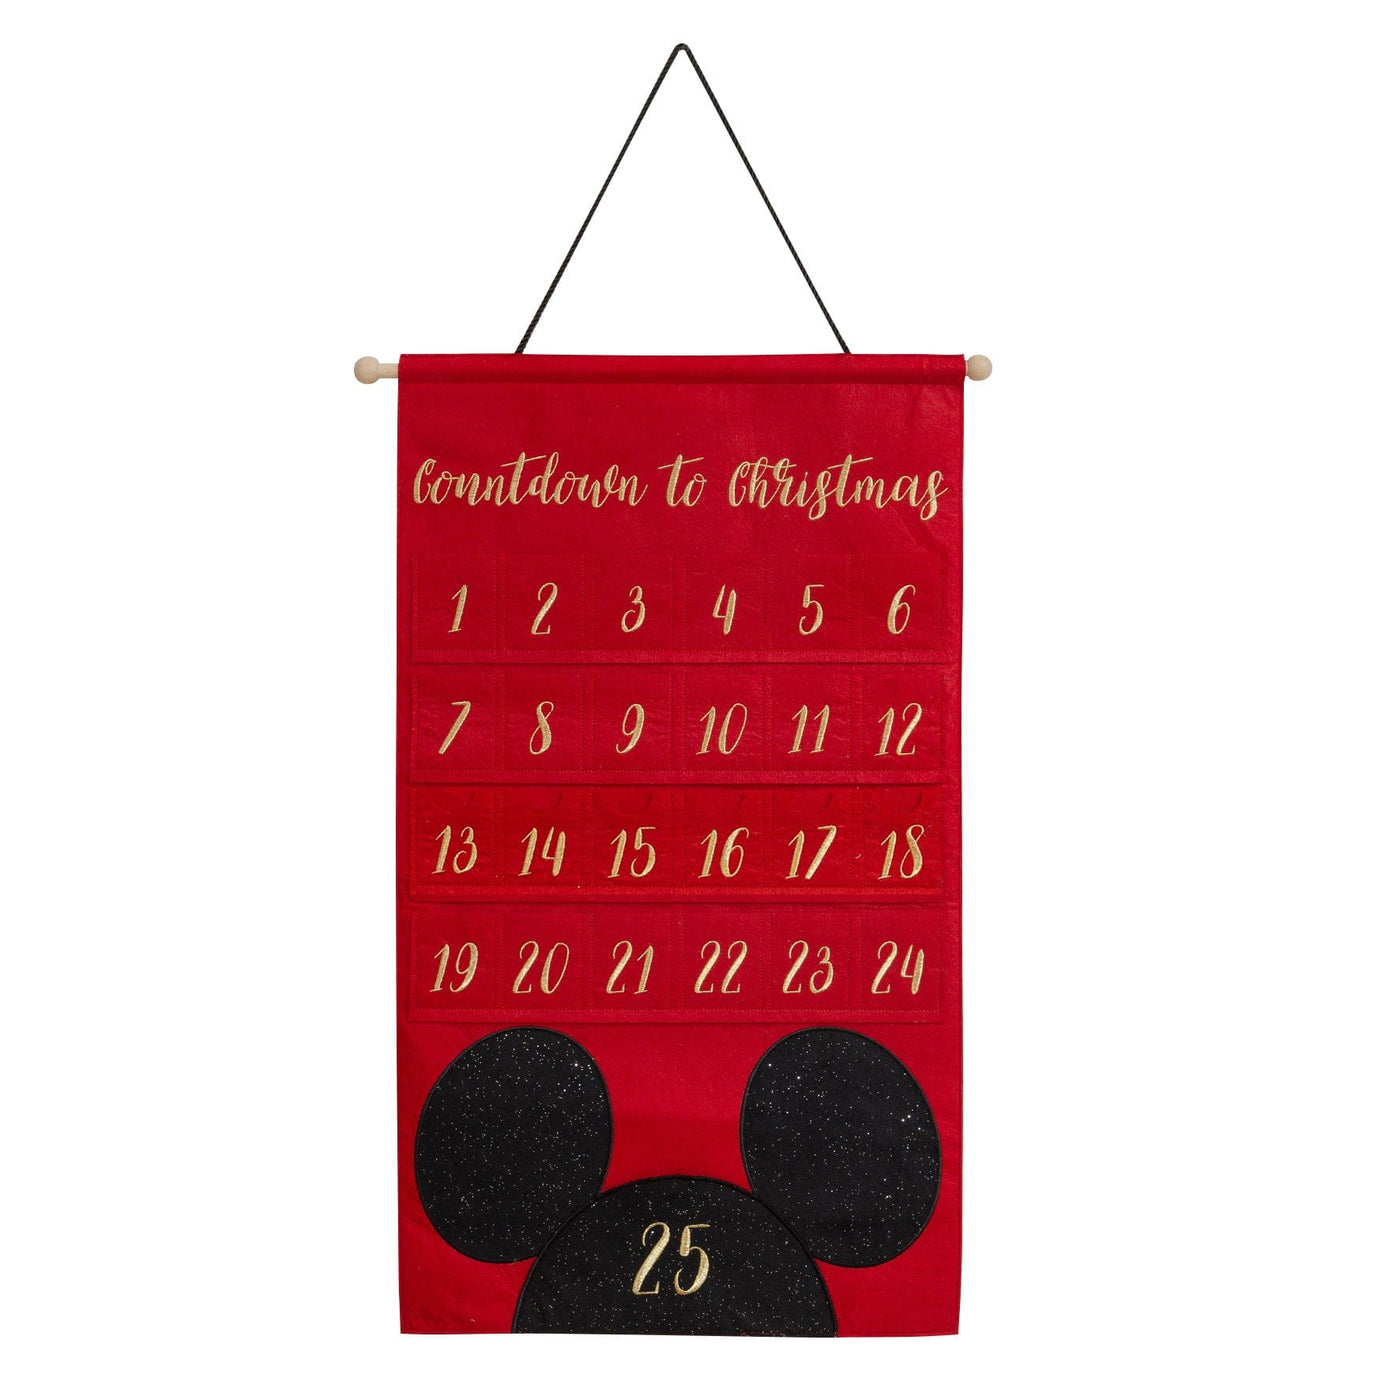 Widdop Gifts Christmas Decorations Large Mickey Mouse Disney Character Felt Advent Calendar